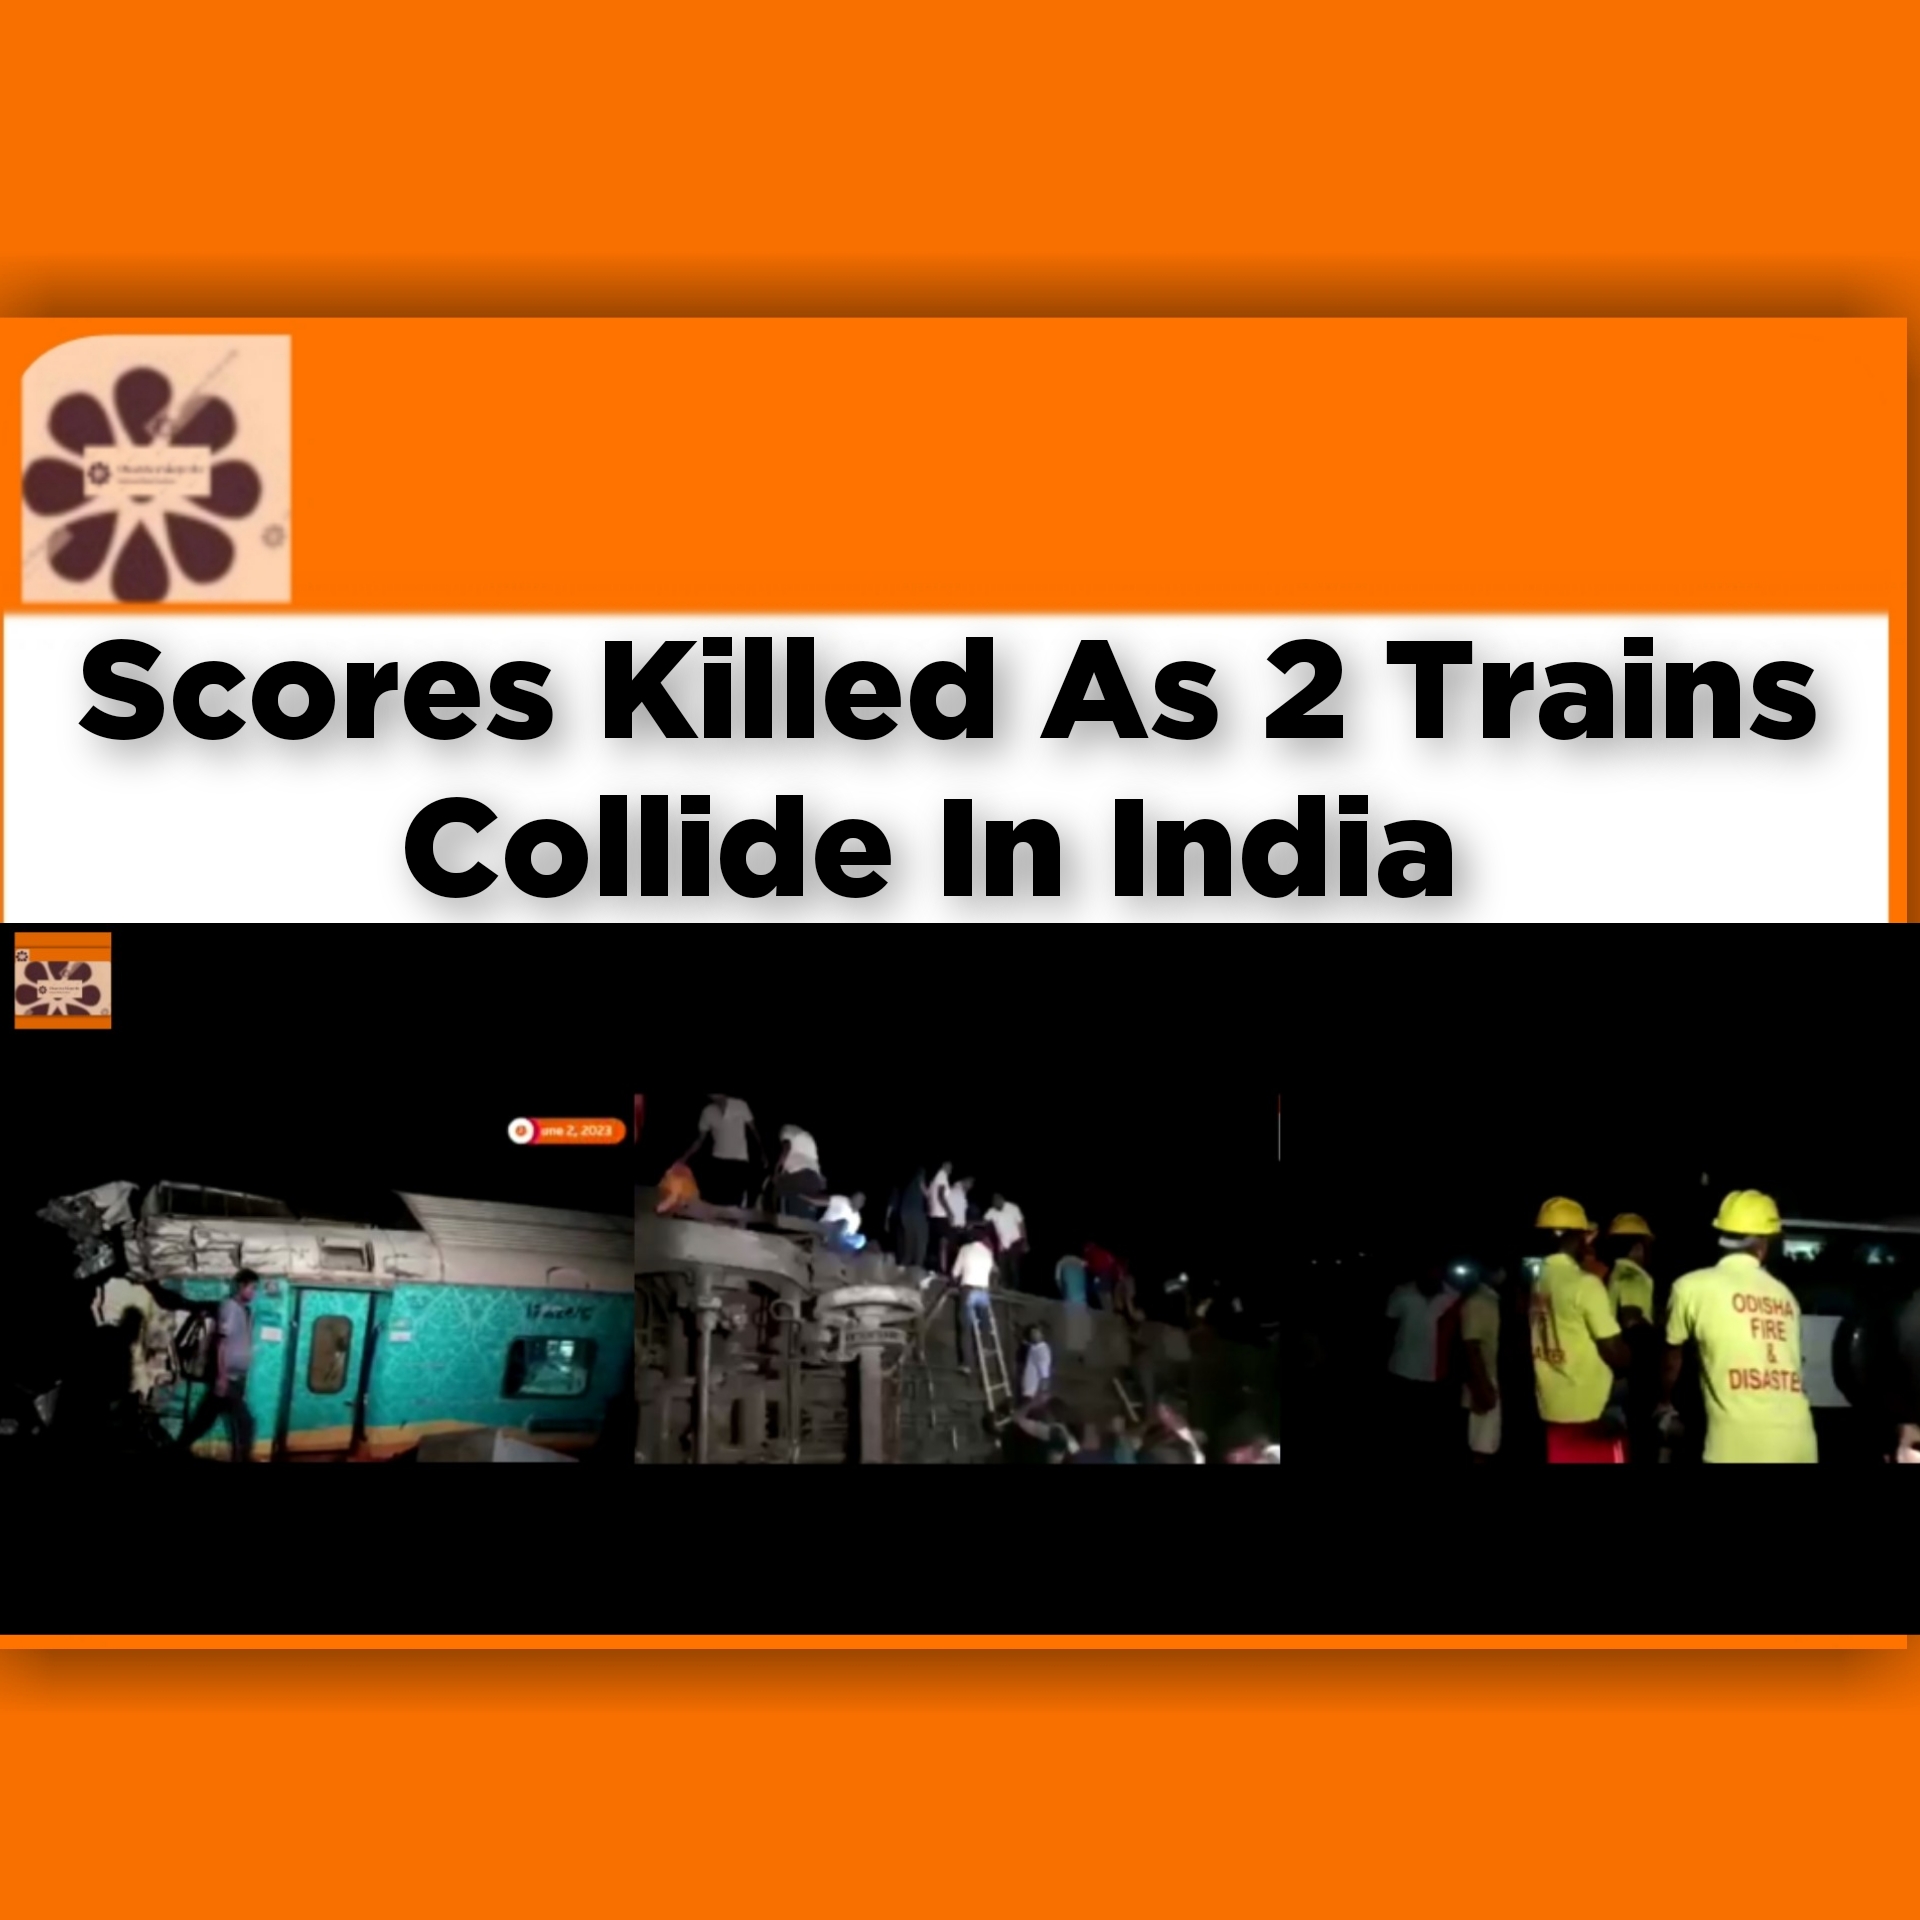 Scores Killed As 2 Trains Collide In India ~ OsazuwaAkonedo #2023Election